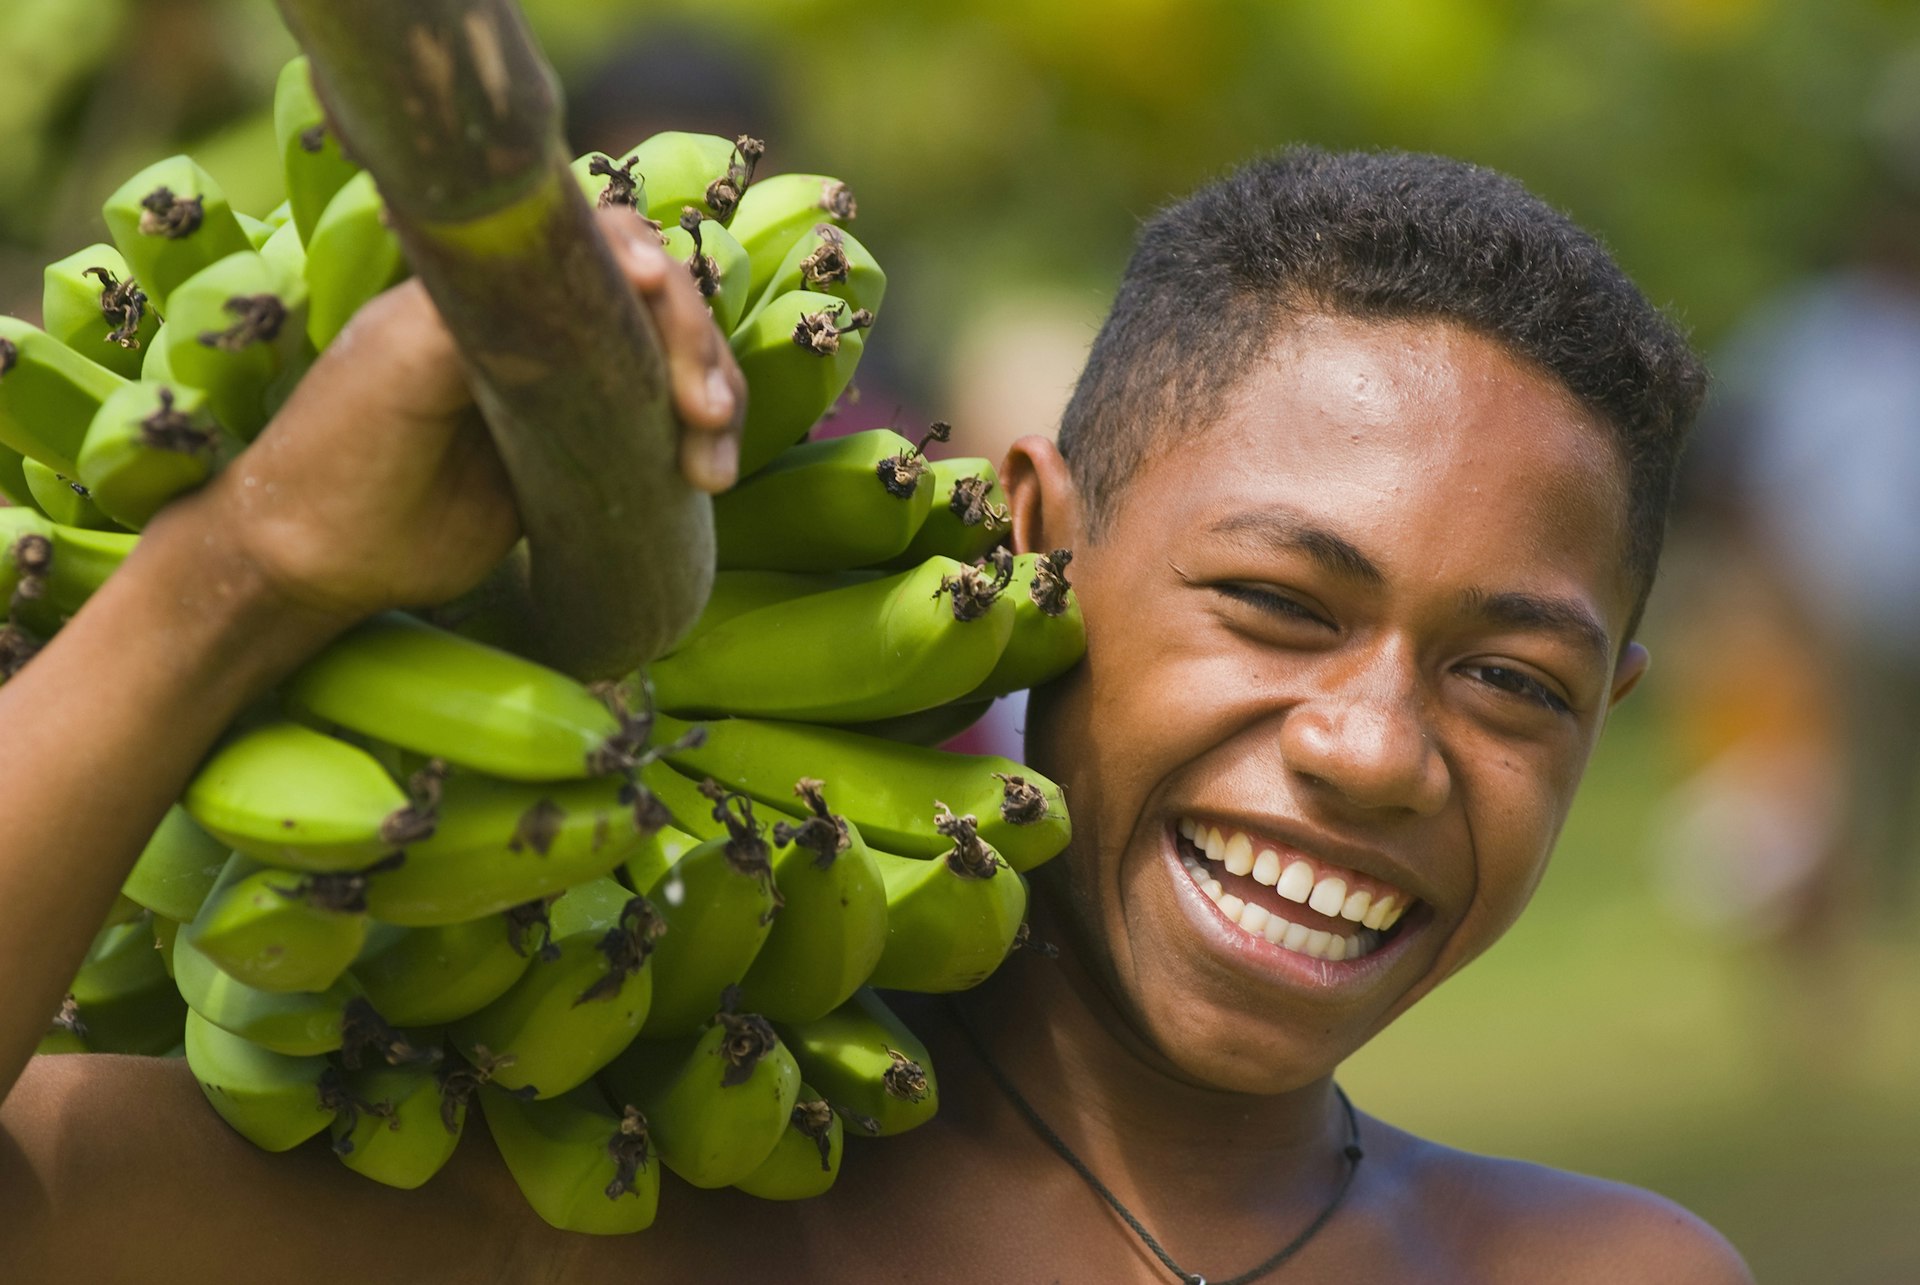 The resorts on Kadavu work alongside the local villagers to source produce